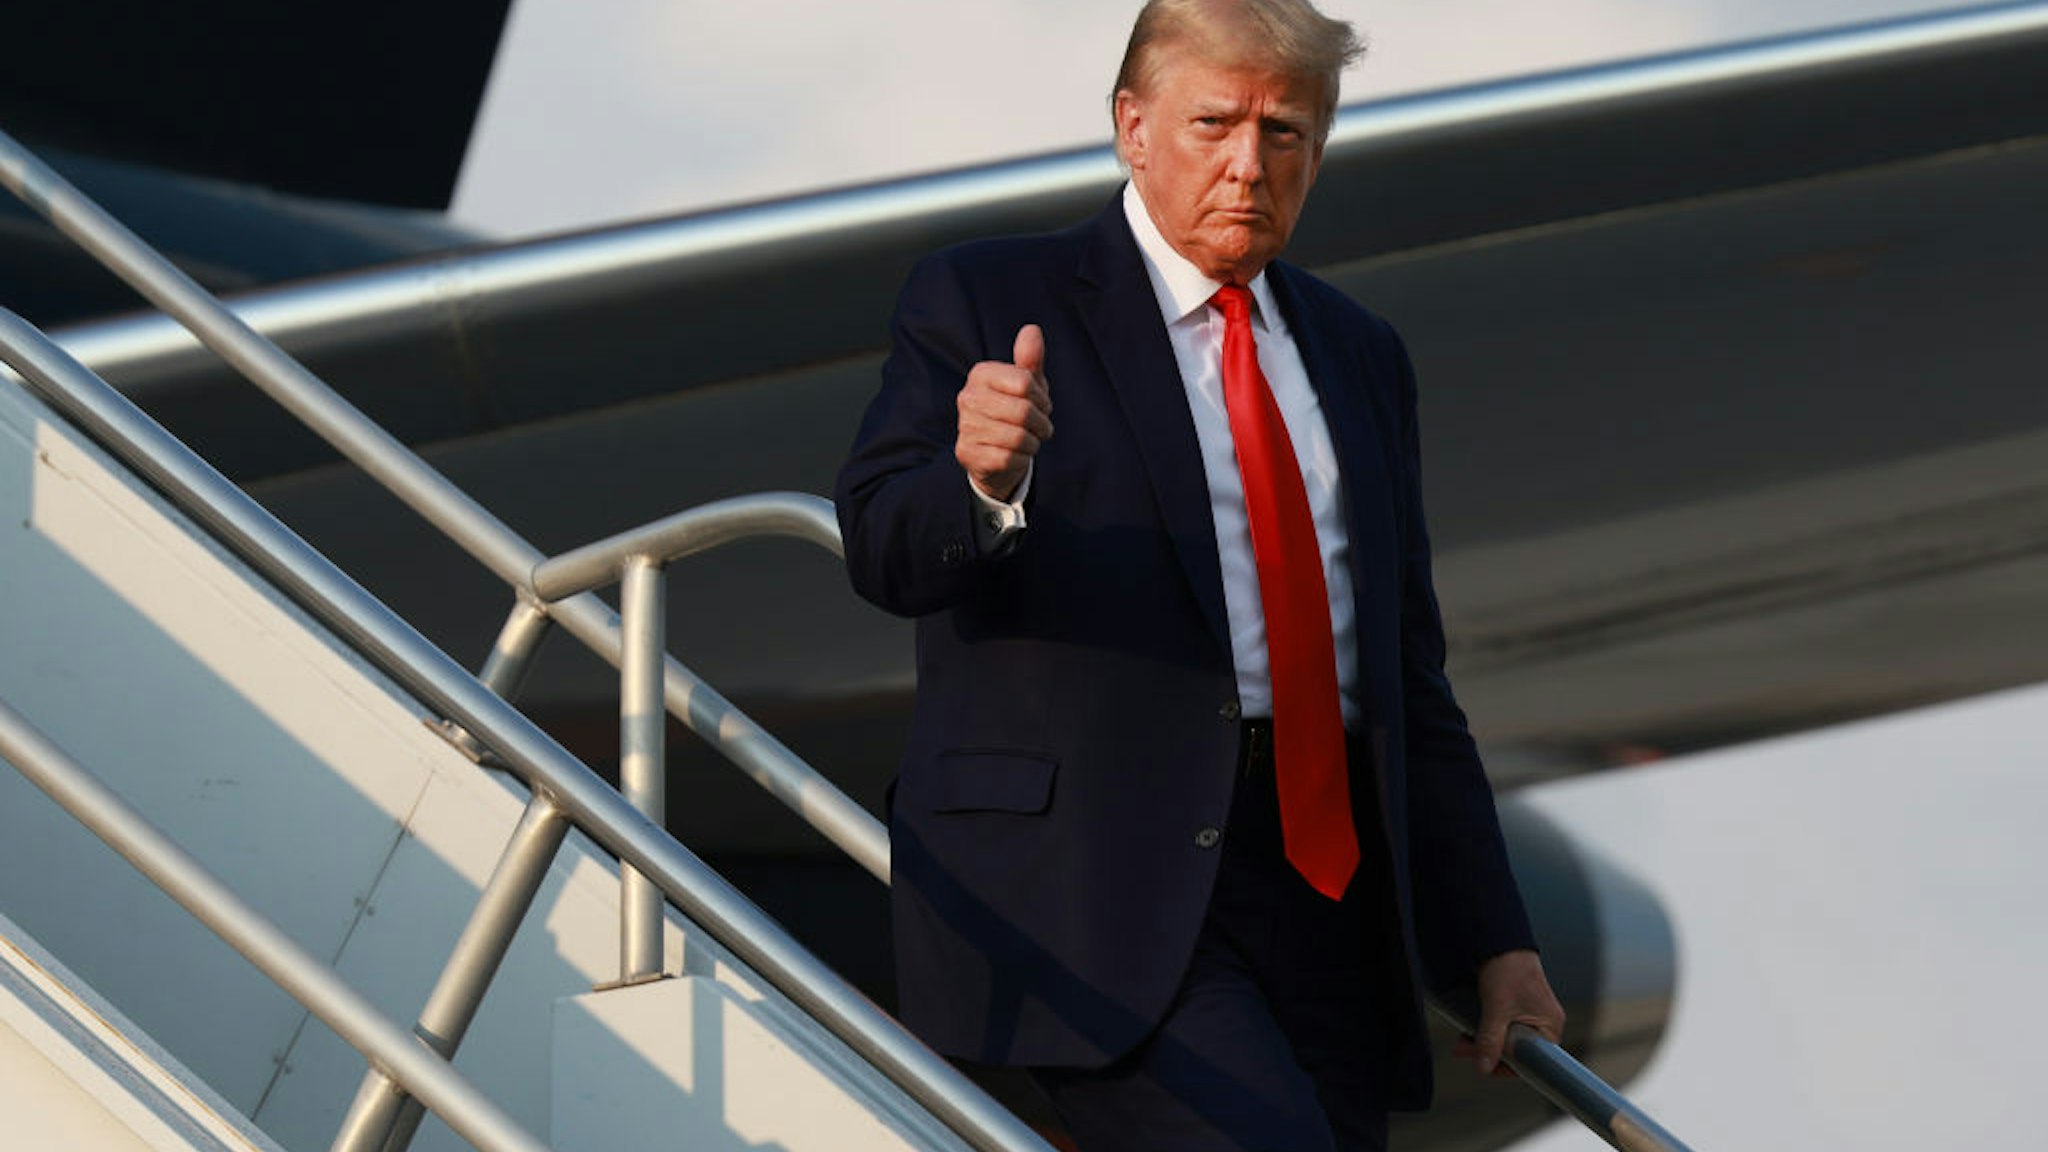 ATLANTA, GEORGIA - AUGUST 24: Former U.S. President Donald Trump gives a thumbs up as he arrives at Atlanta Hartsfield-Jackson International Airport on August 24, 2023 in Atlanta, Georgia. Trump is expected to surrender at the Fulton County jail, where he will be booked on 13 charges related to an alleged plan to overturn the results of the 2020 presidential election in Georgia.